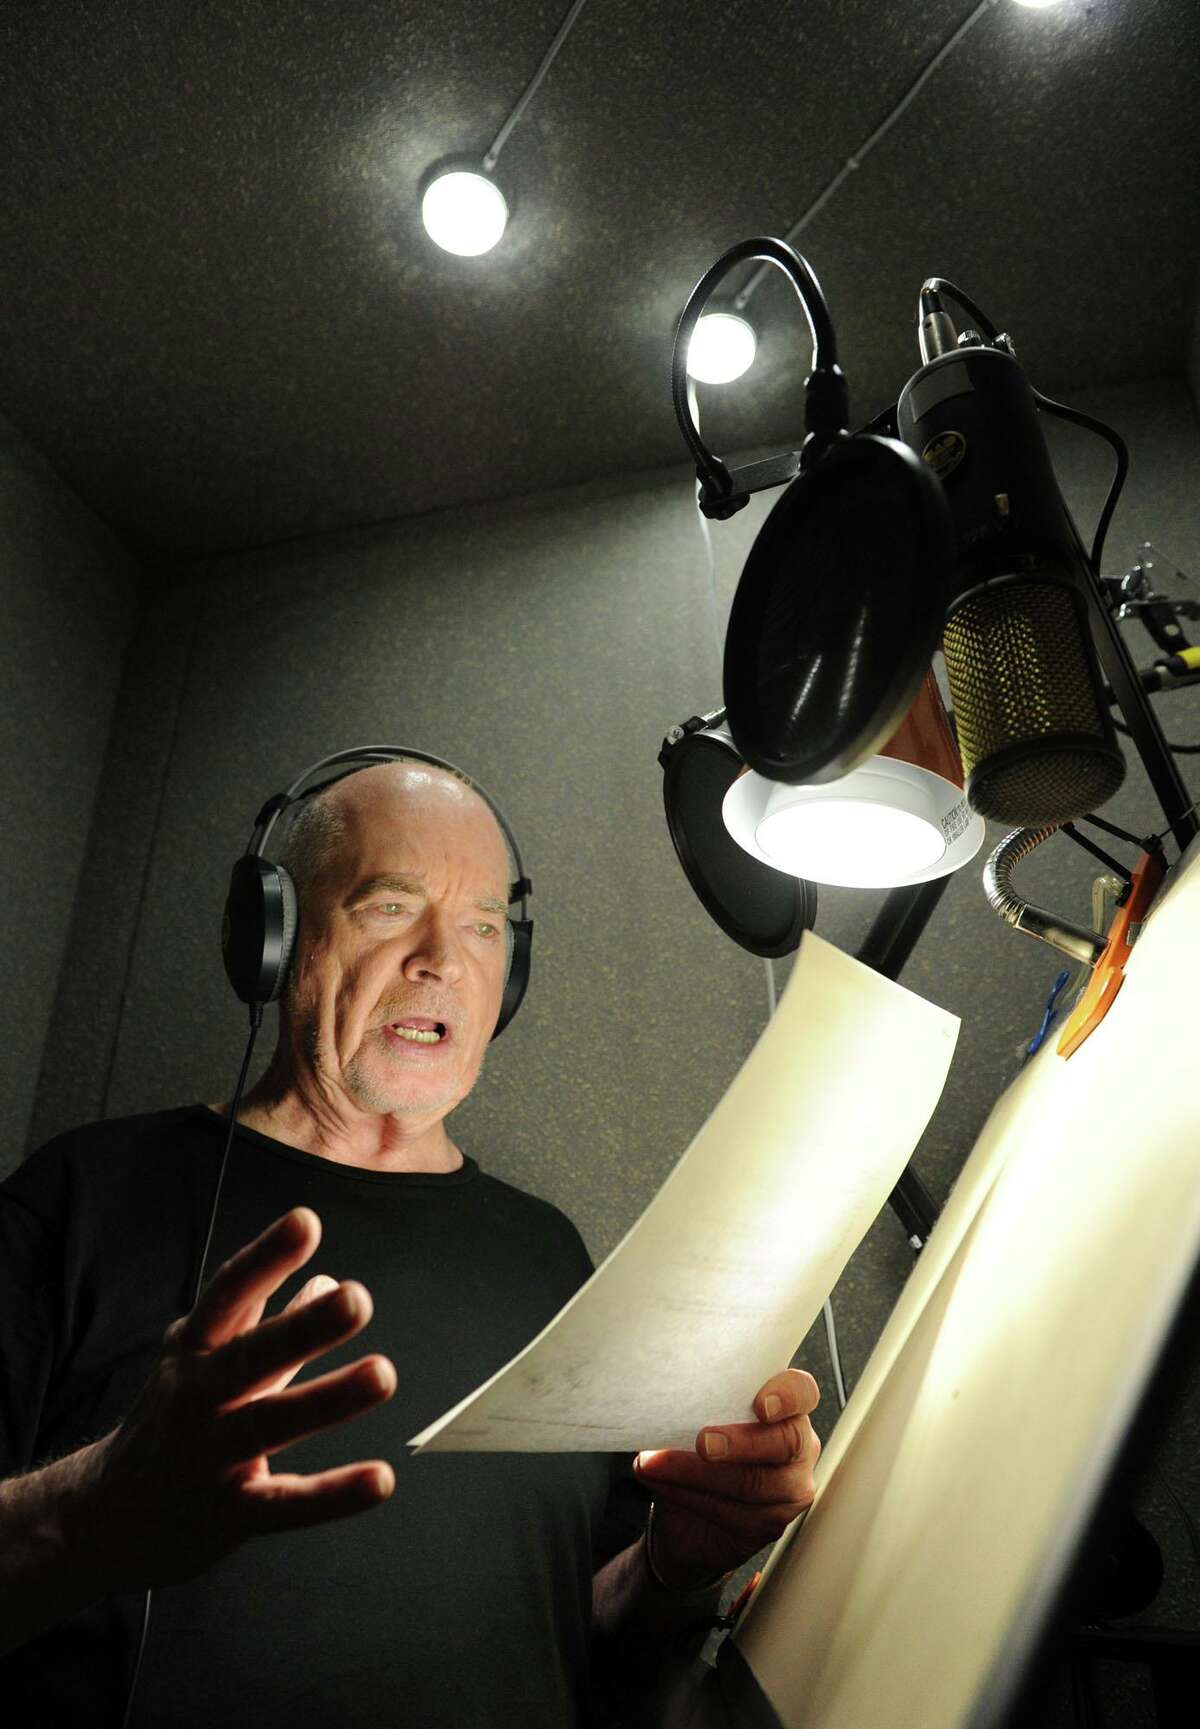 Don Morrow of Danbury is a local celebrity voice actor. He is pictured working in his recording booth at home Monday, Sept. 27, 2010.